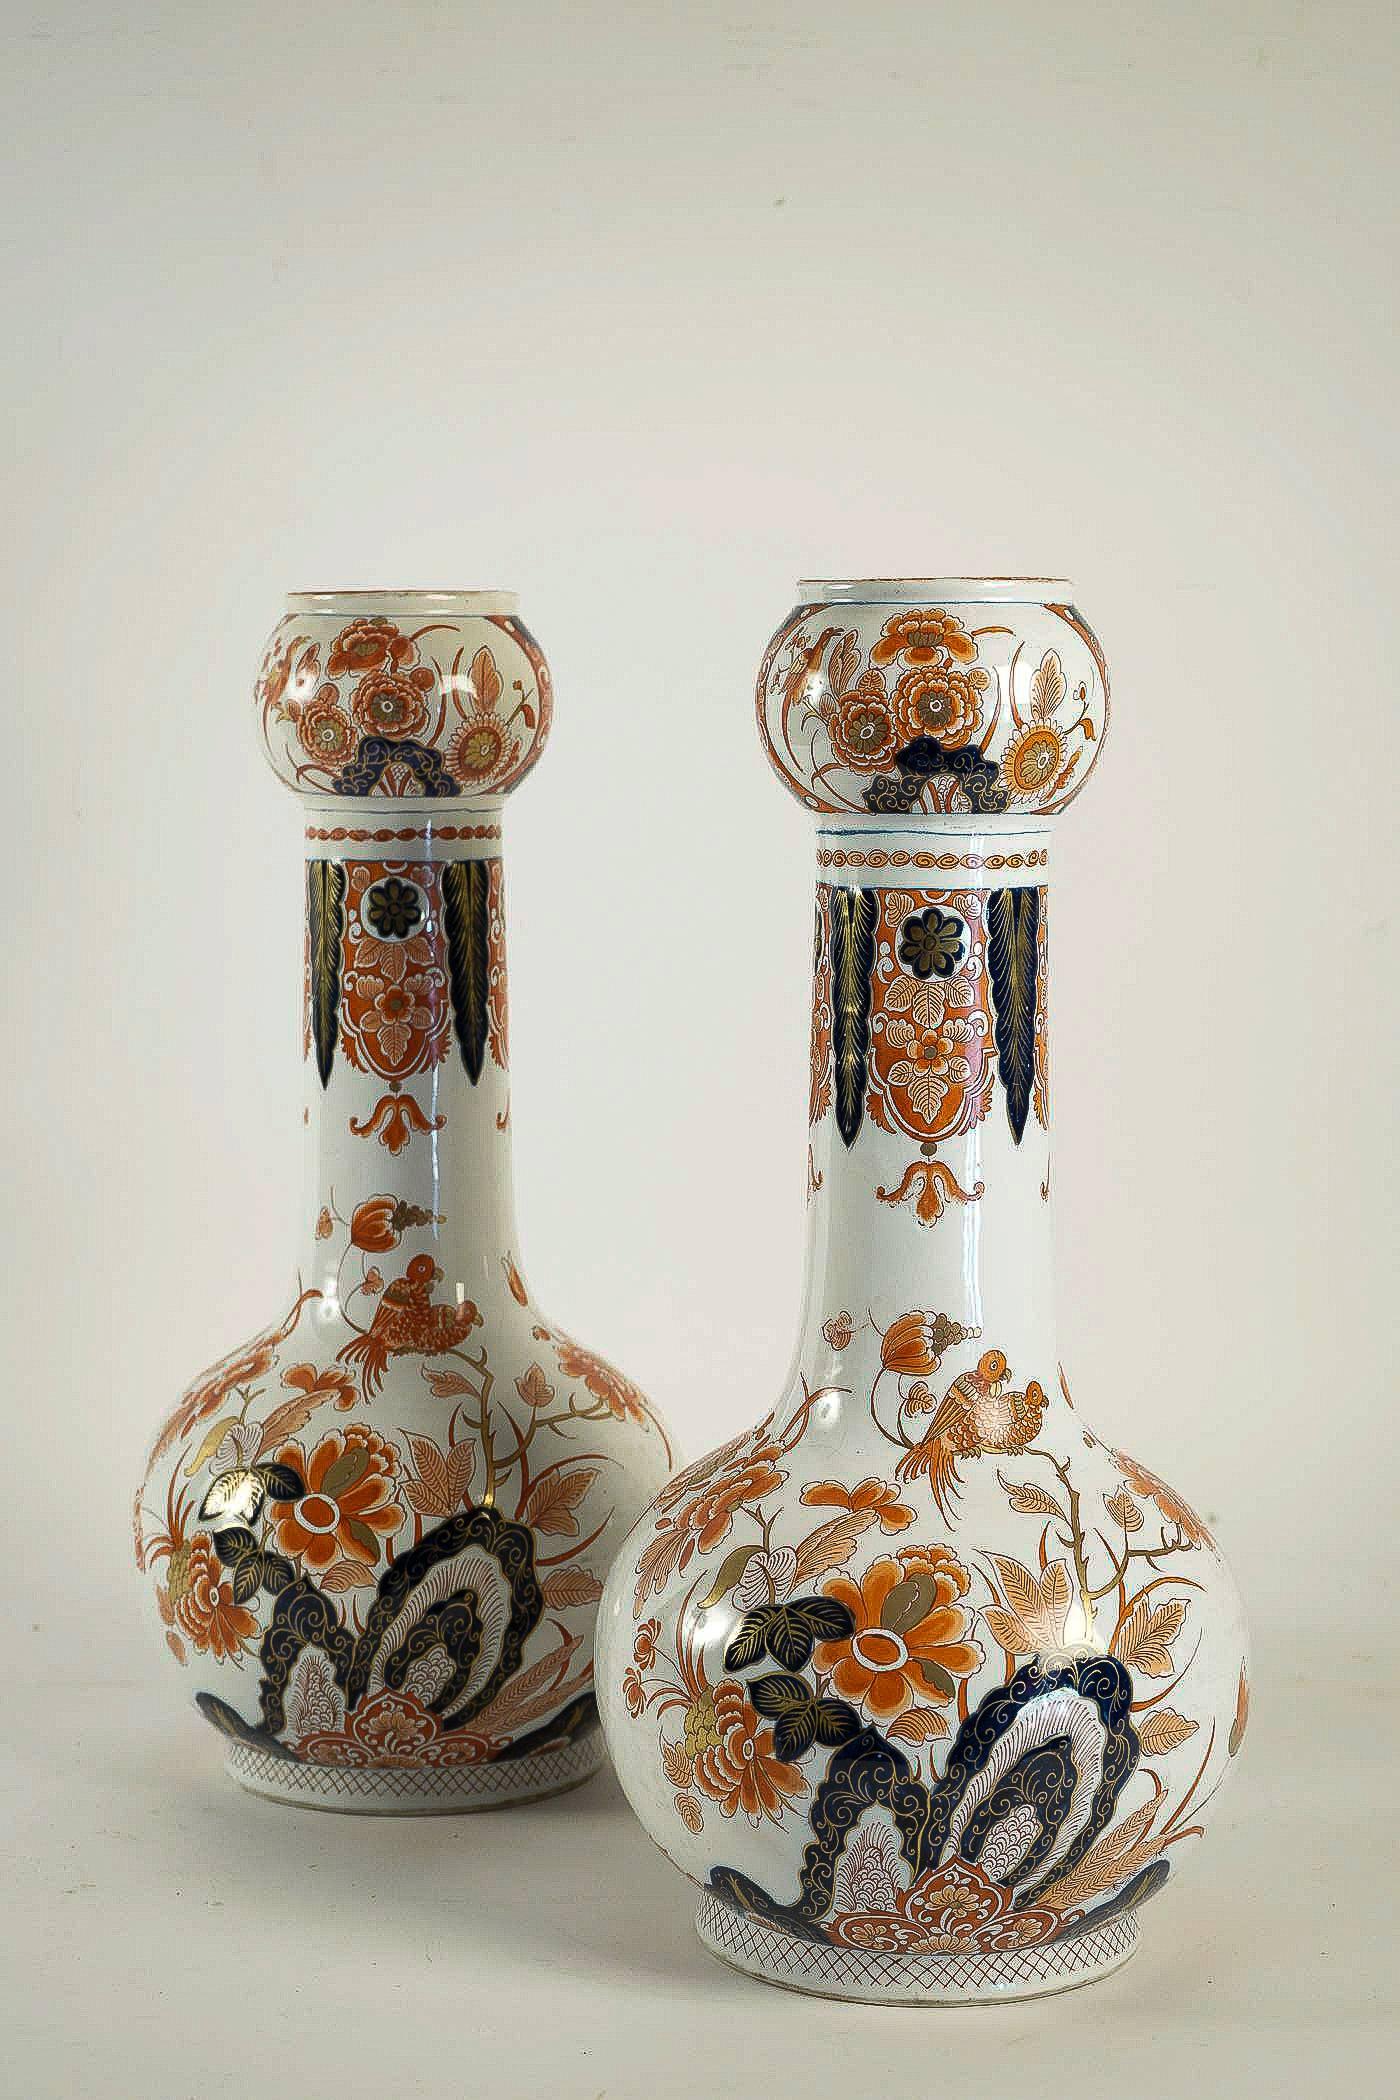 Dutch Late 18th Century, Polychrome Delft Faience Pair of Gourd-Shaped Vases 8